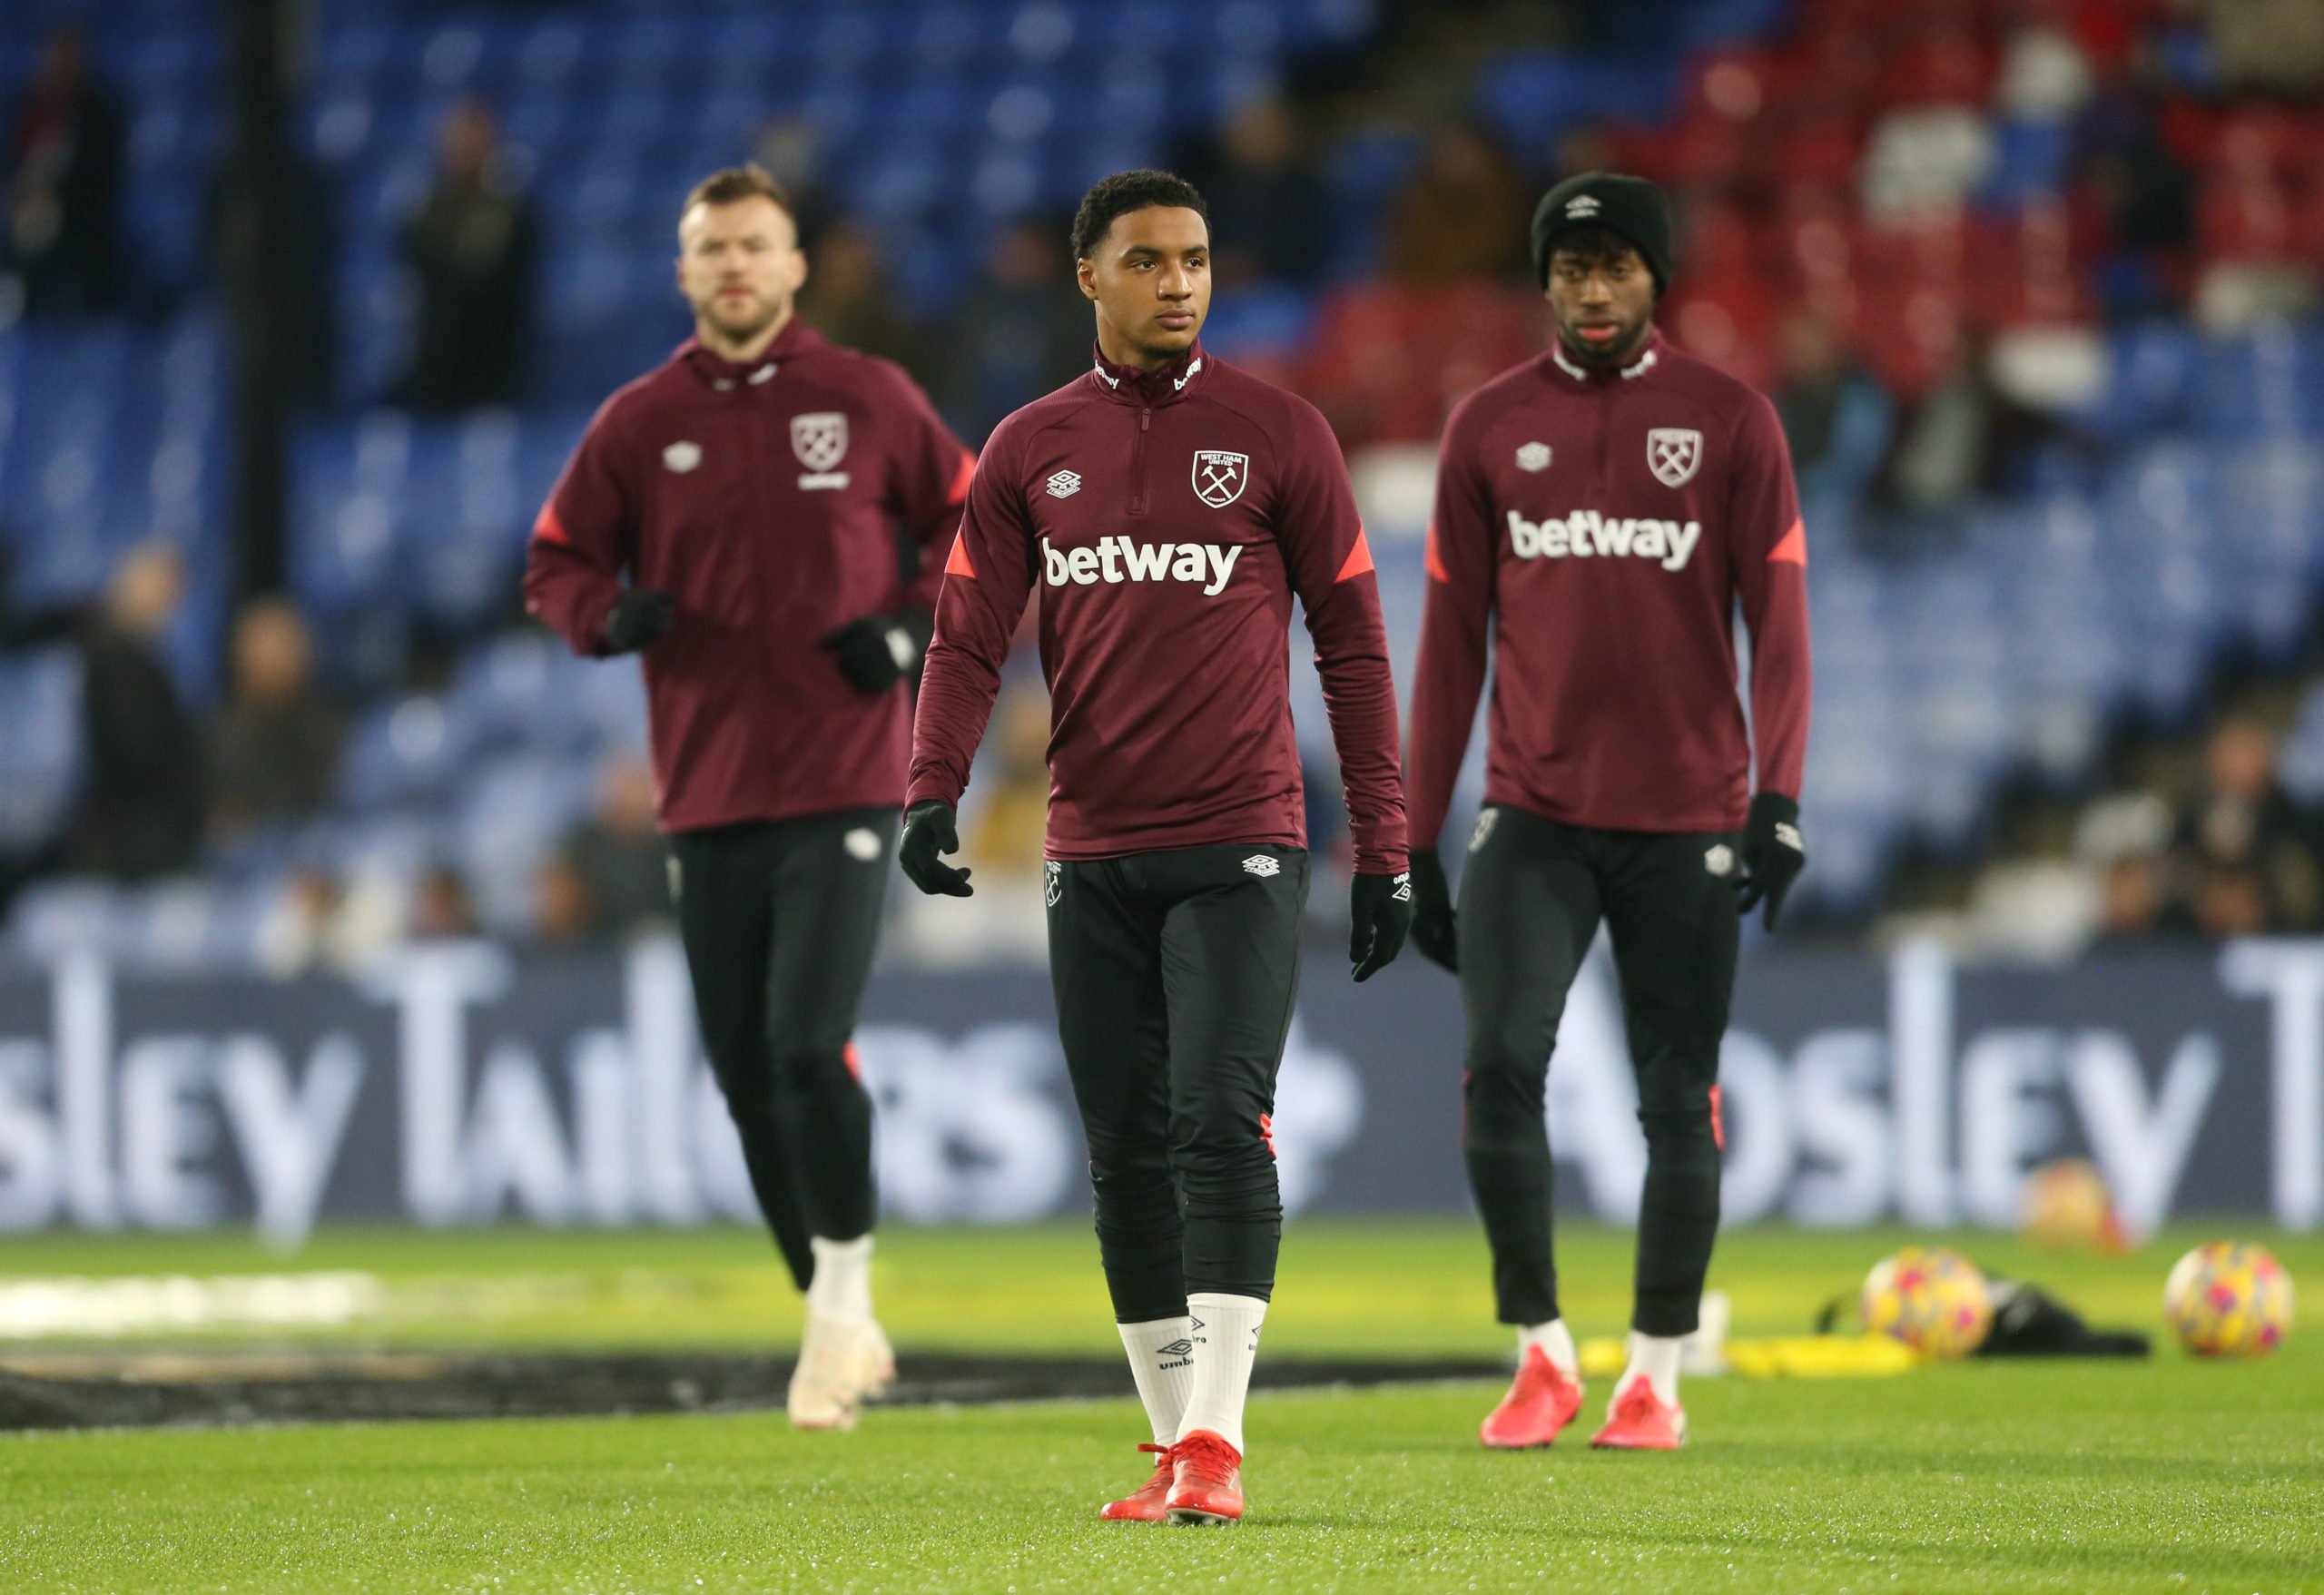 David Moyes must be brave and start West Ham teenager who’s a ‘massive, massive threat’ in FA Cup clash vs Leeds